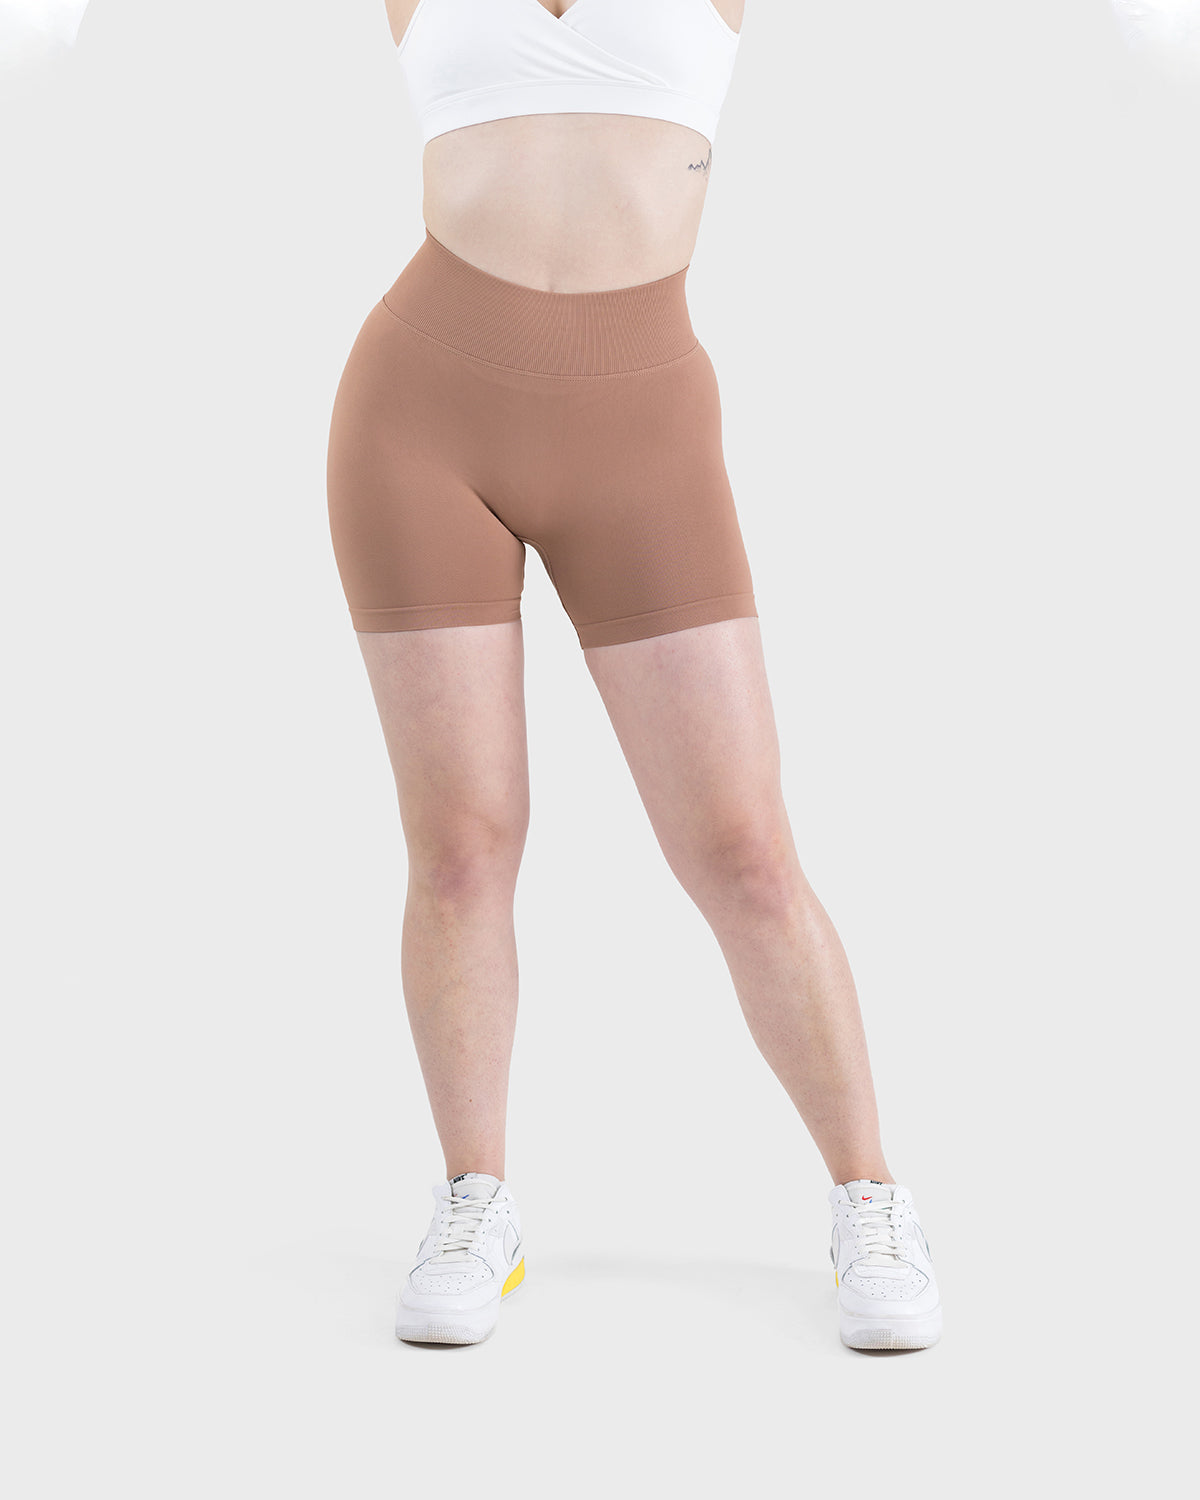 Form Sculpting Shorts - Maple Brown